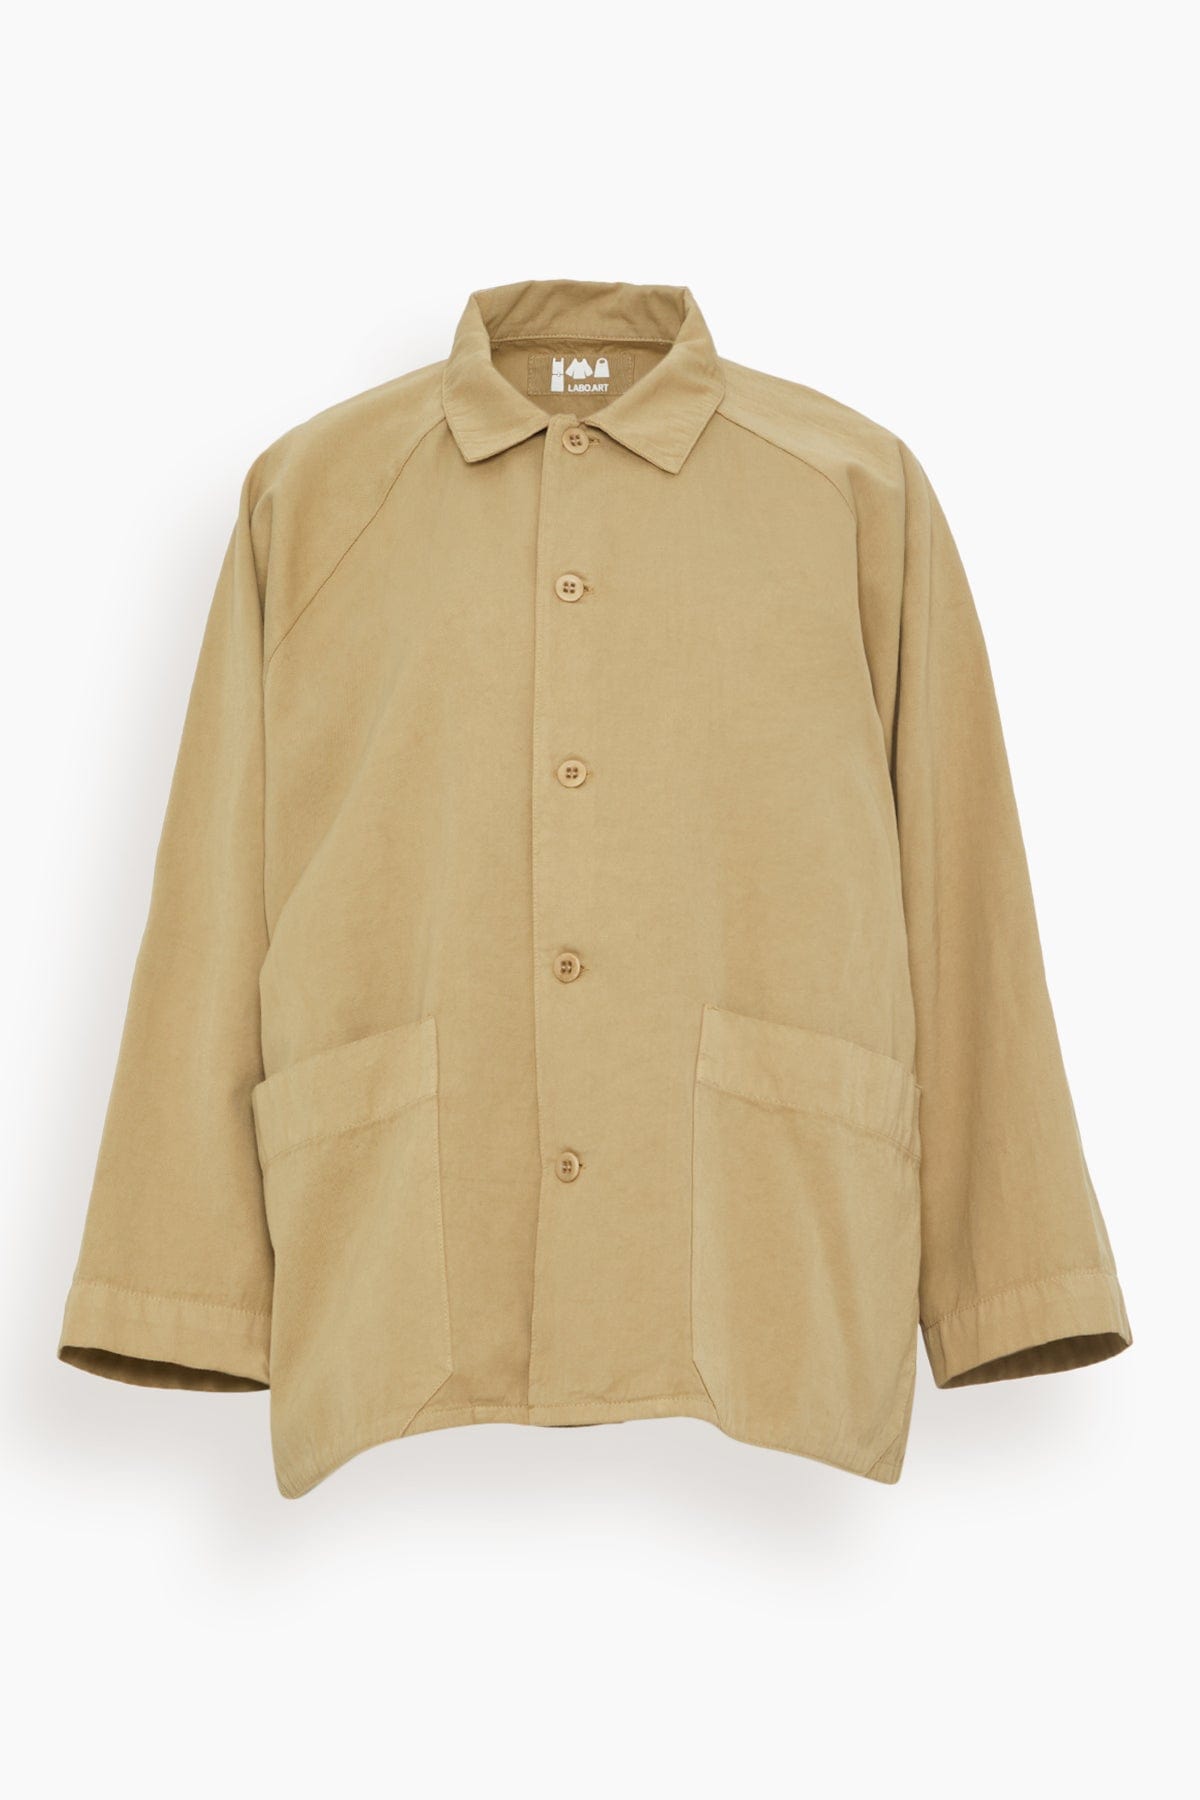 Labo.Art Giacca Ermou Jacket in Mojave - Neutrals - Size: 2 / M